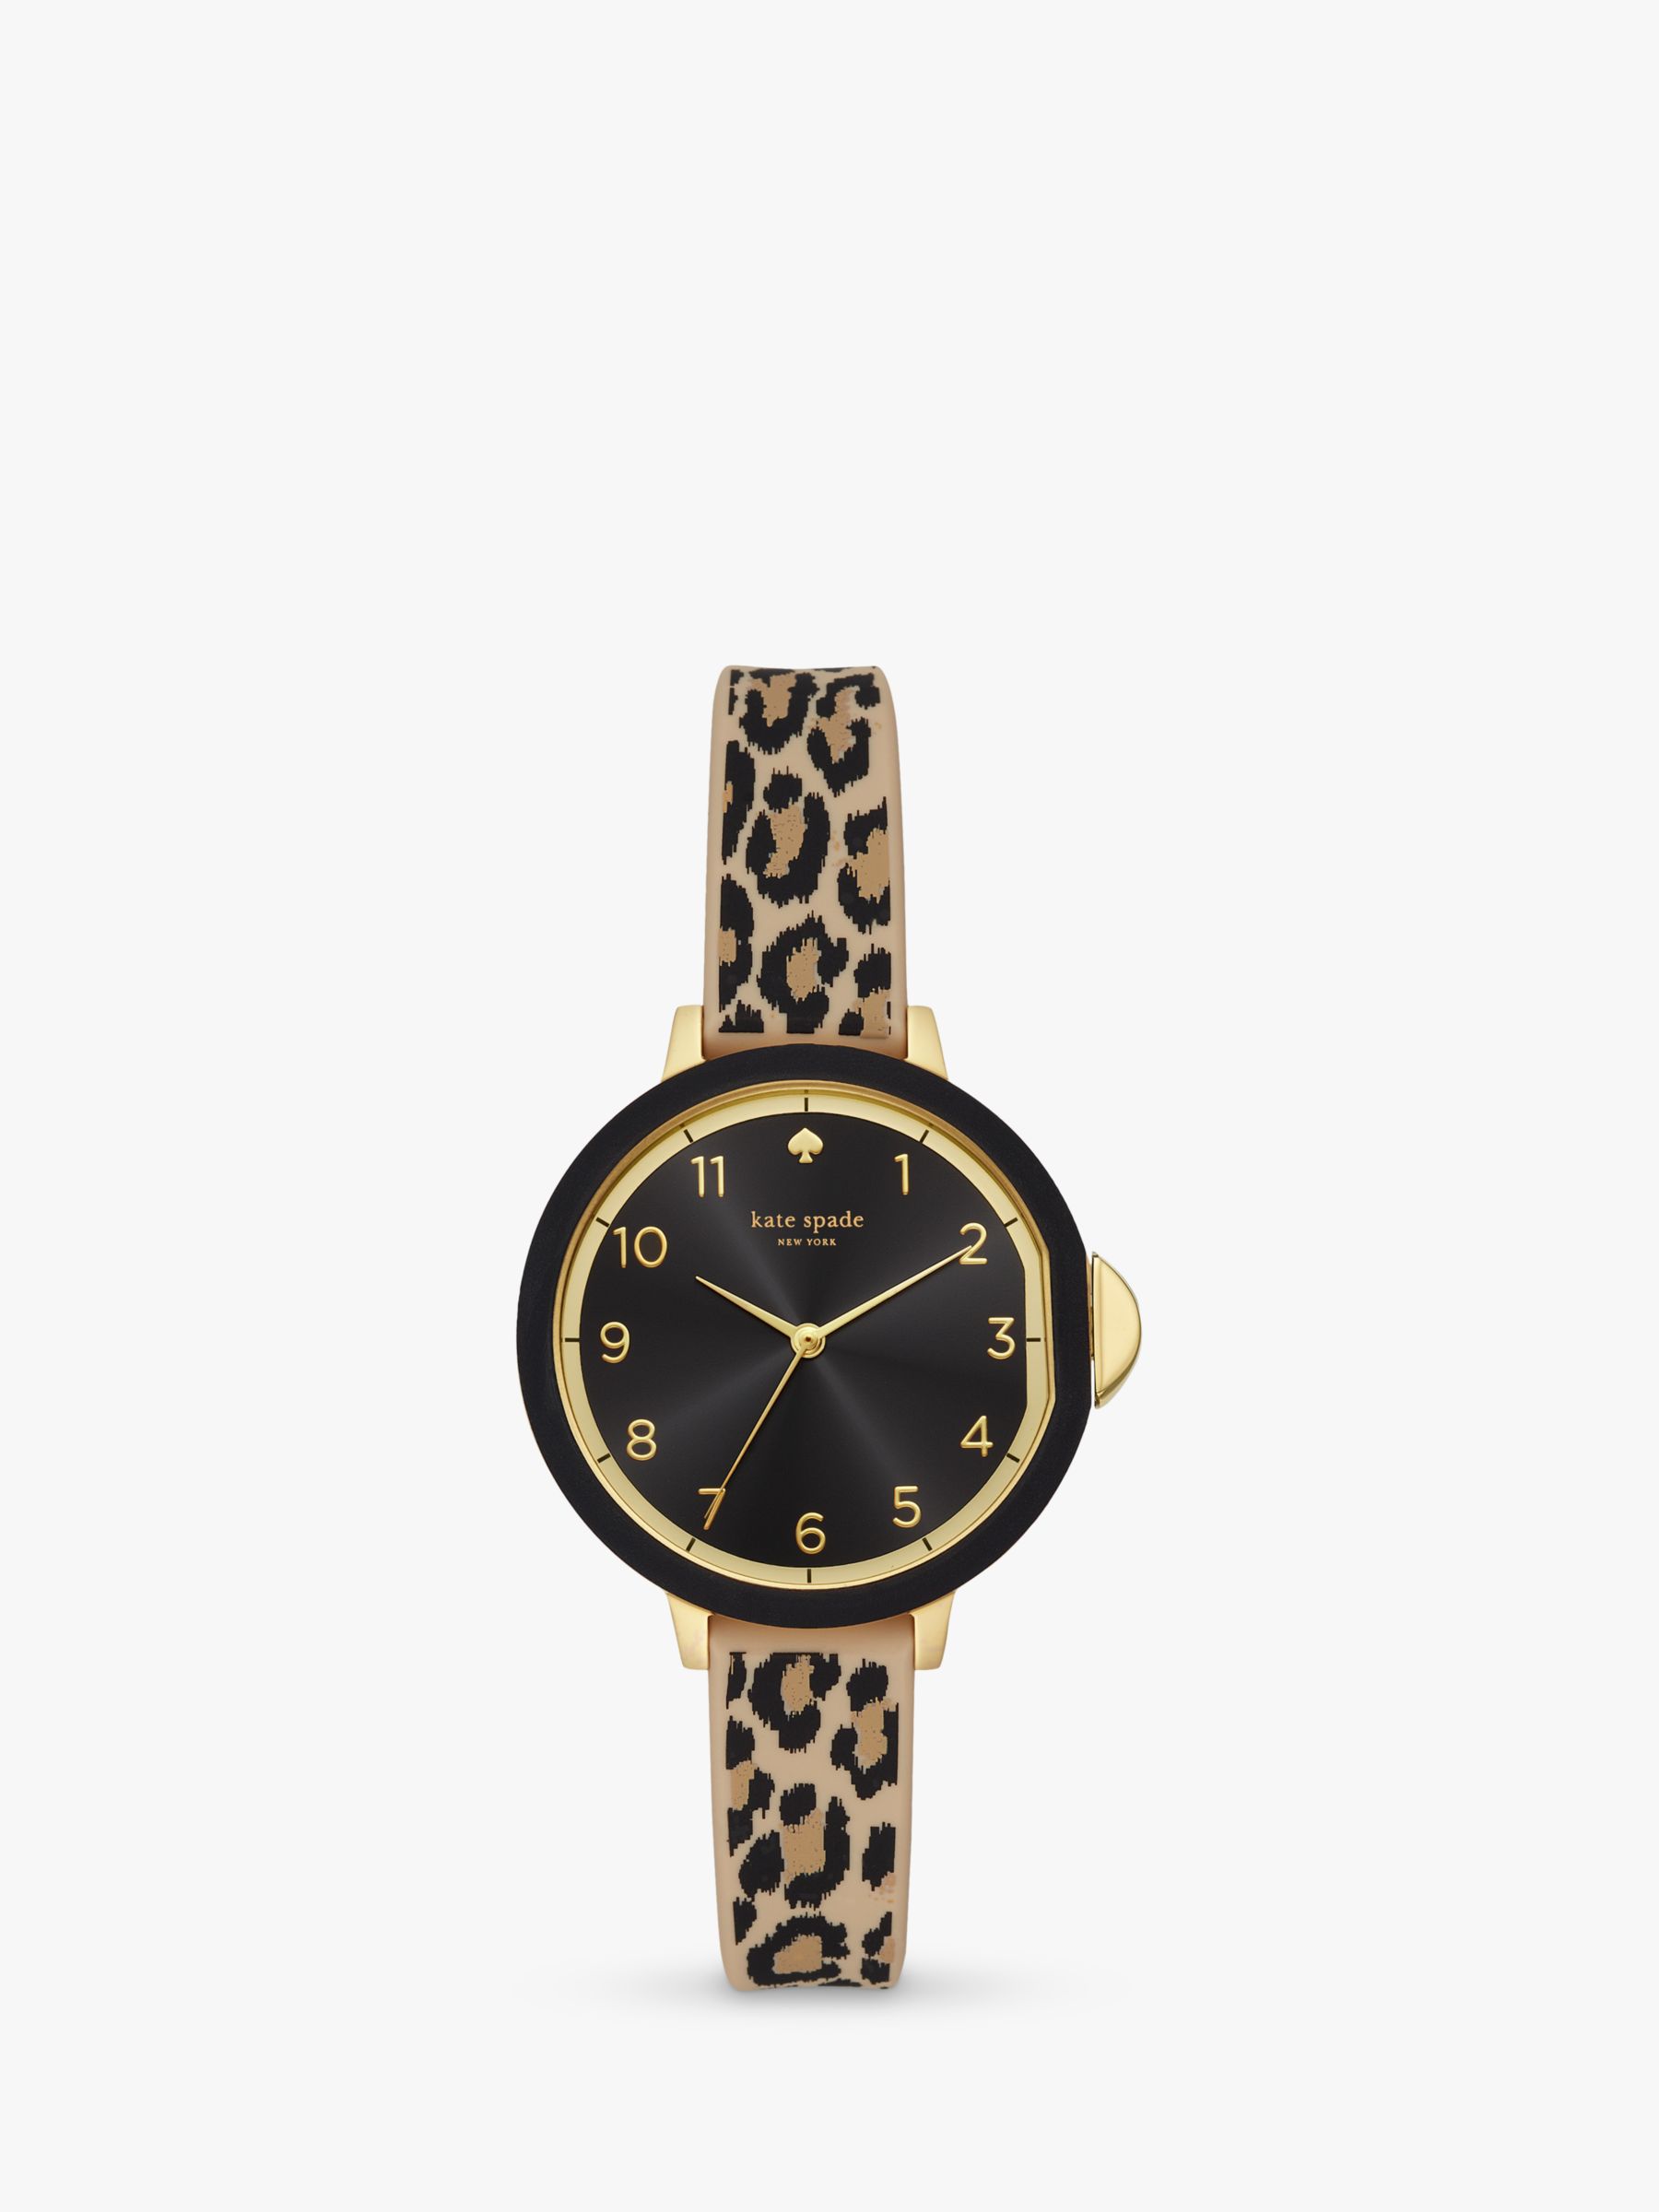 kate spade new york Park Row Leather Strap Watch, Black / Leopard KSW1485  at John Lewis & Partners